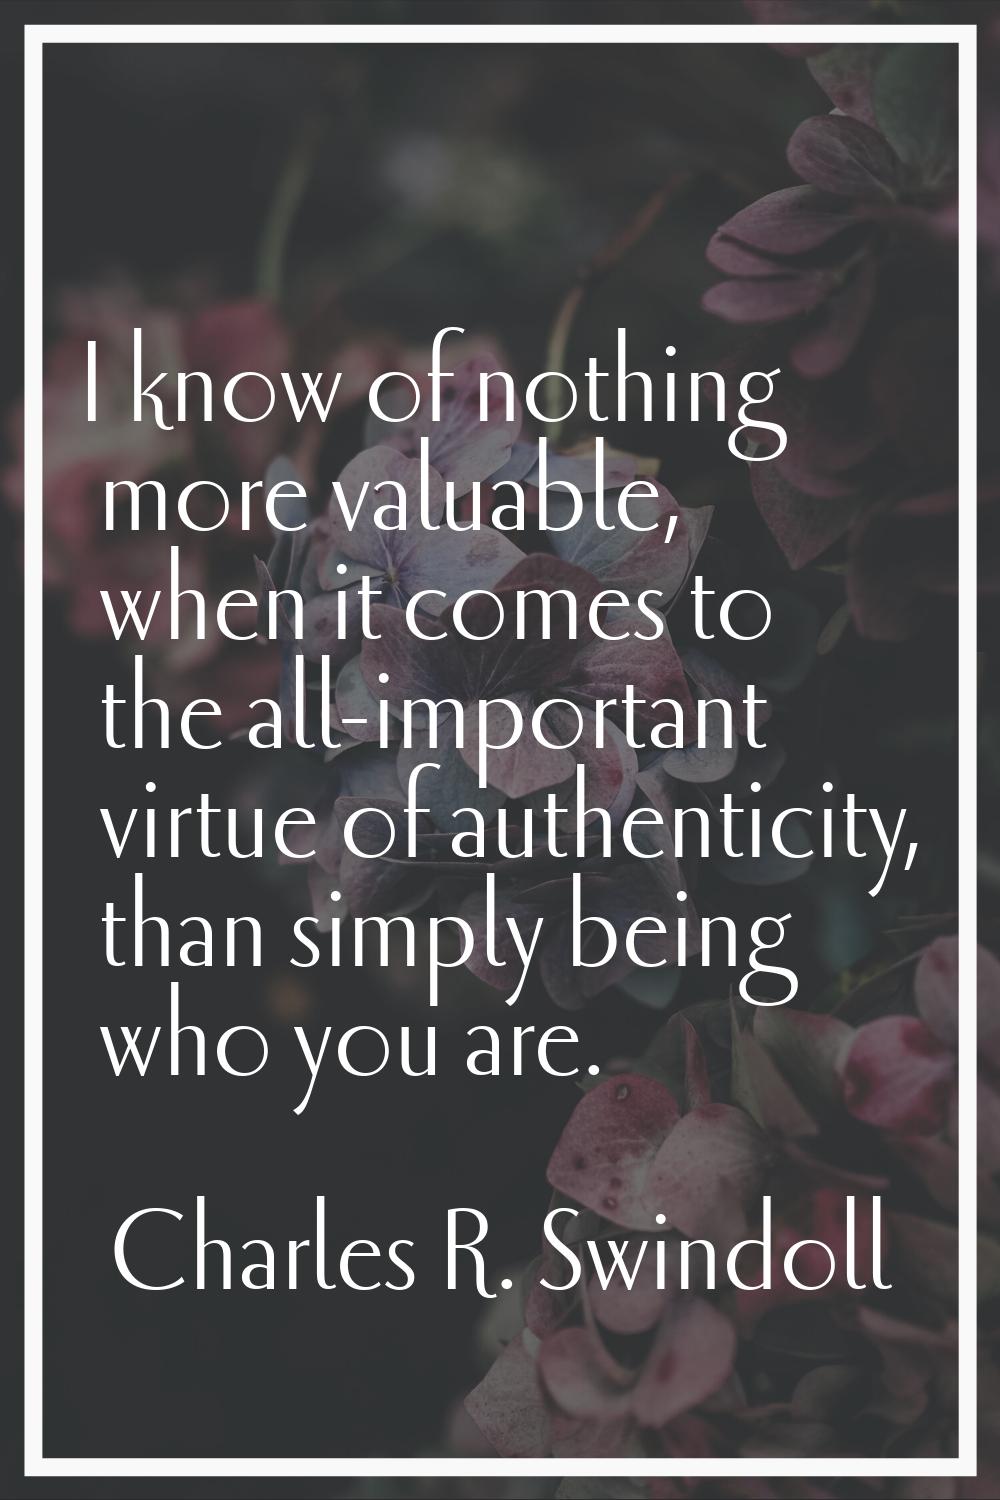 I know of nothing more valuable, when it comes to the all-important virtue of authenticity, than si